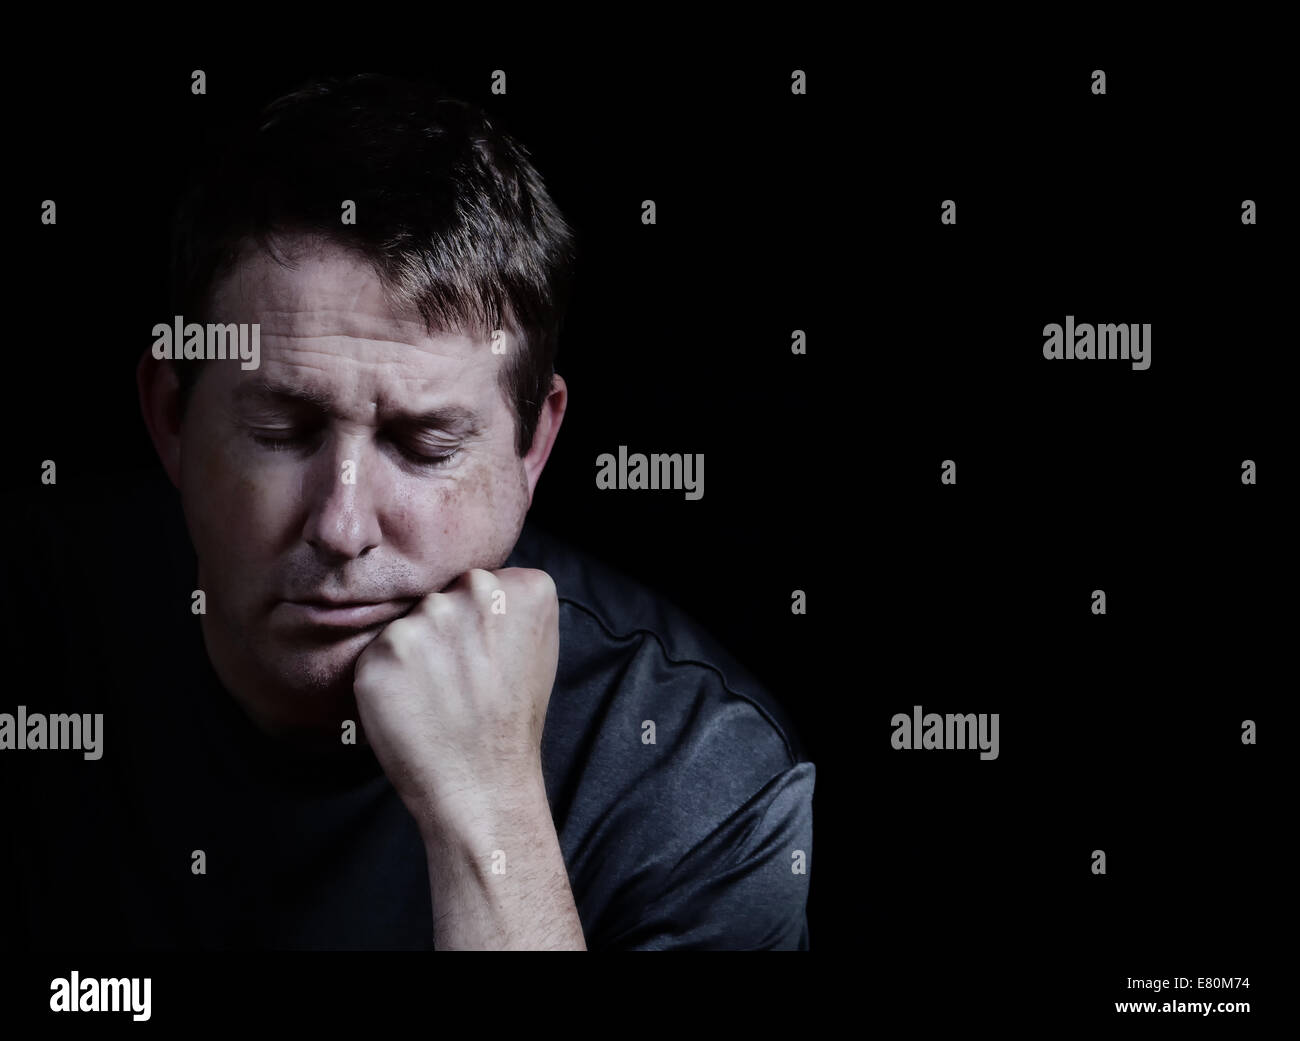 Front view close up of mature man with his eyes closed and chin in hand displaying depression on black background Stock Photo